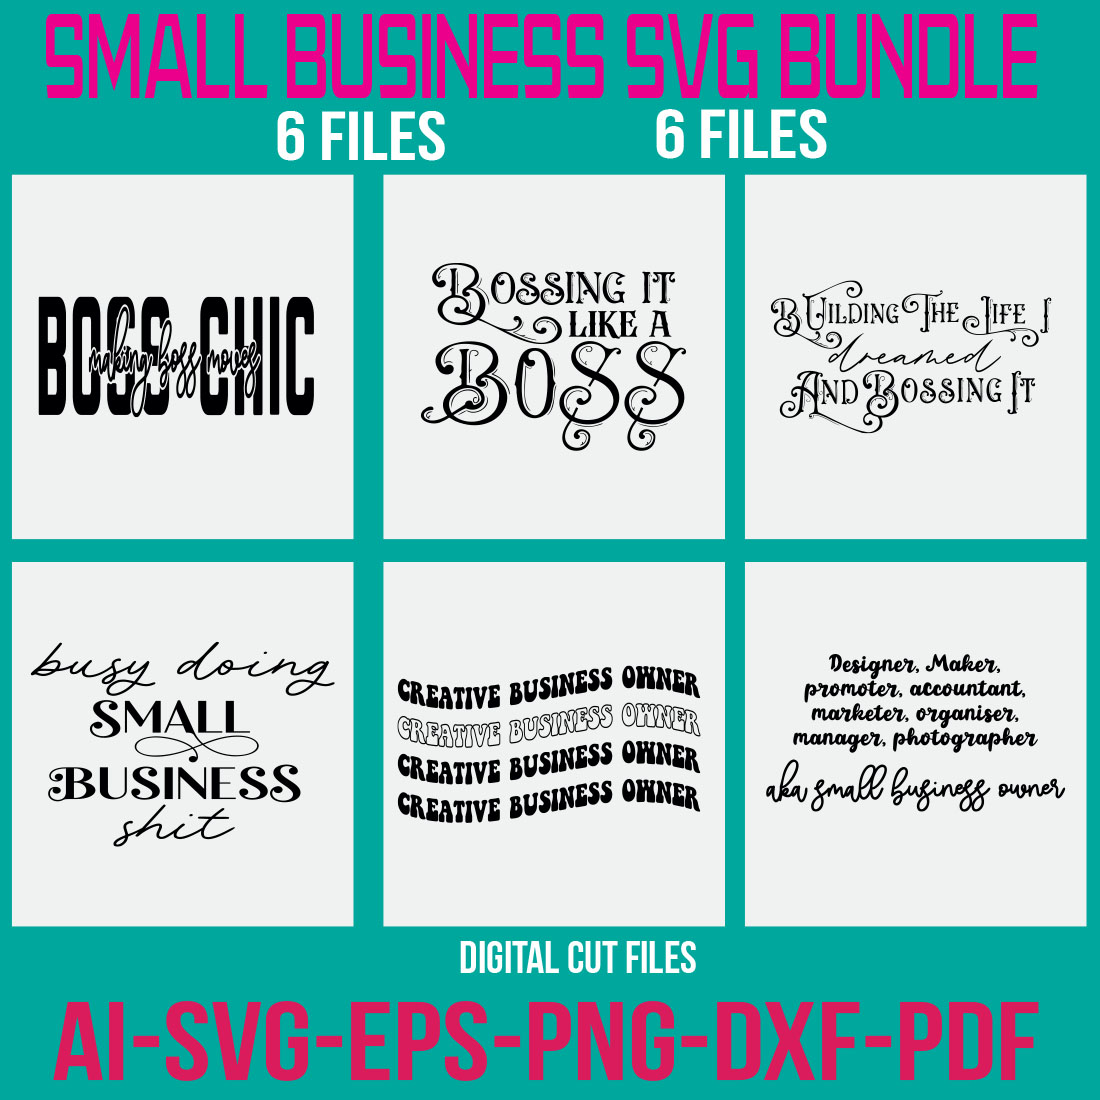 Small Business SVG Bundle cover image.